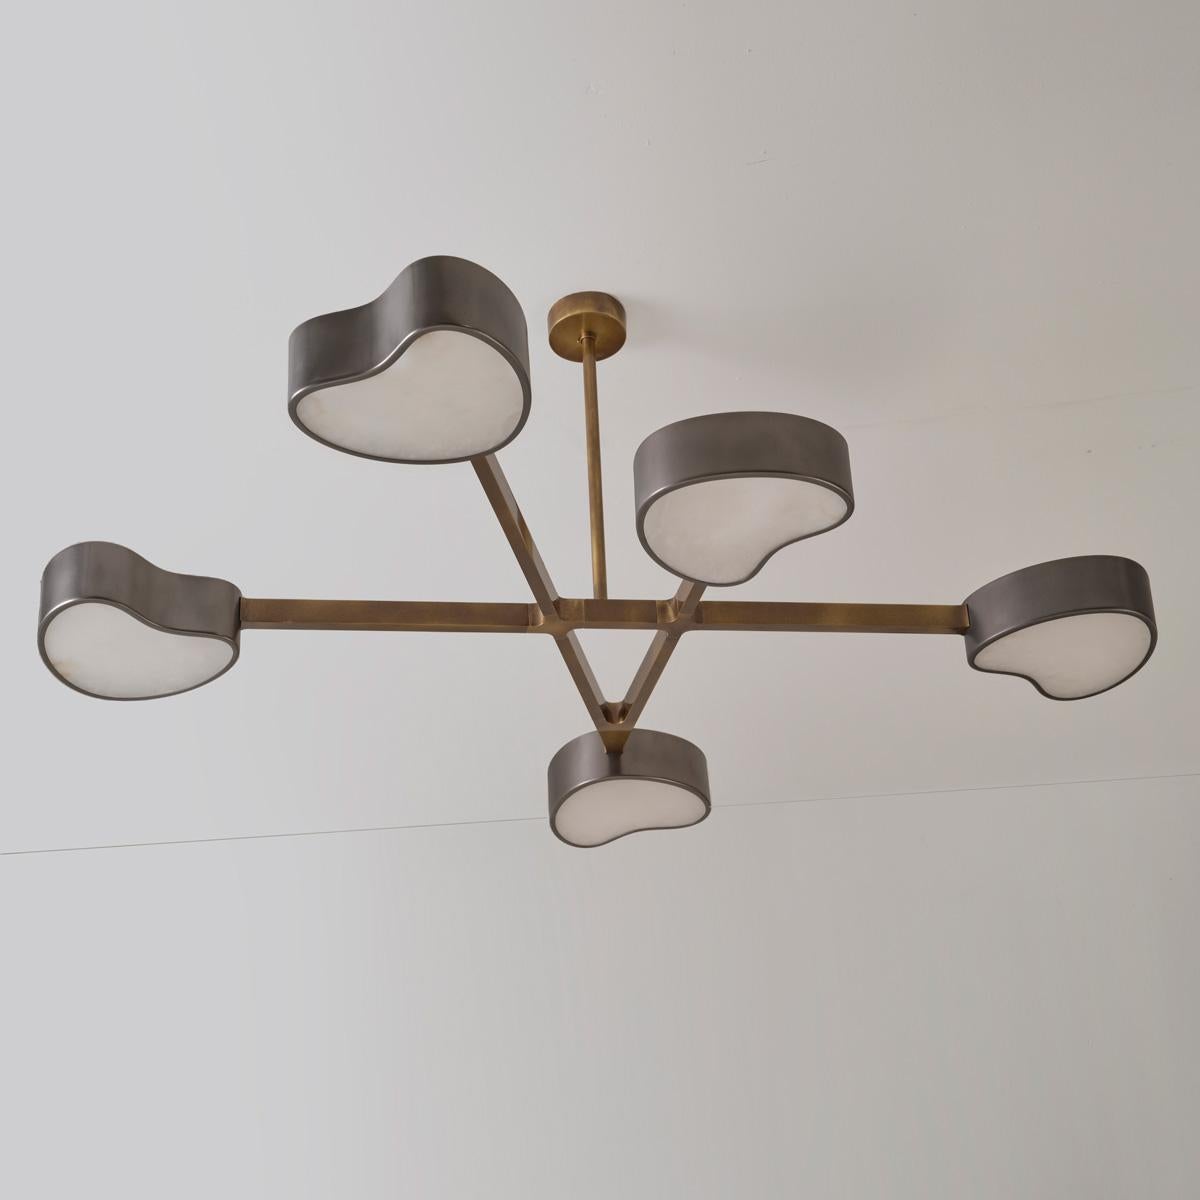 Contemporary Cuore N.5 Ceiling Light by Gaspare Asaro. Polished Brass Finish For Sale